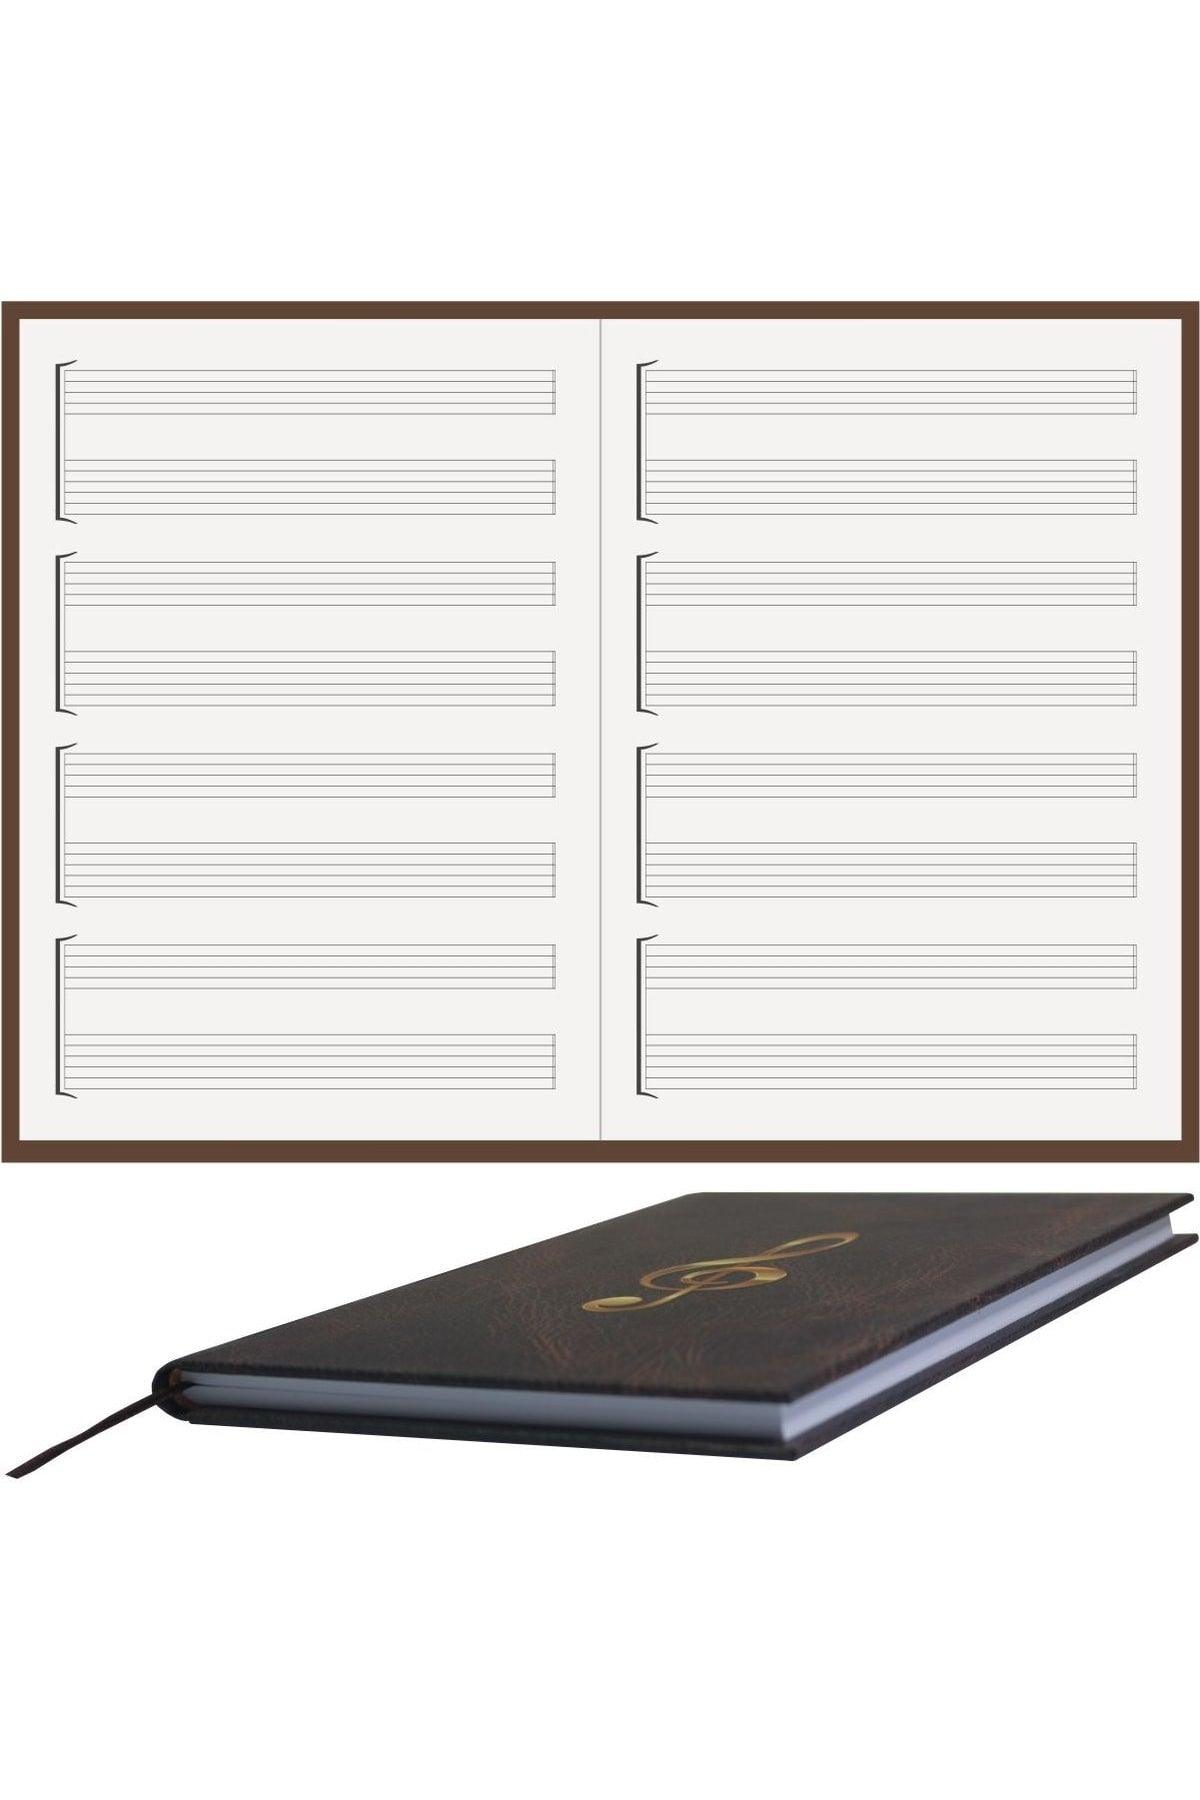 Guitar Notebook (with Keyless Quotes) -